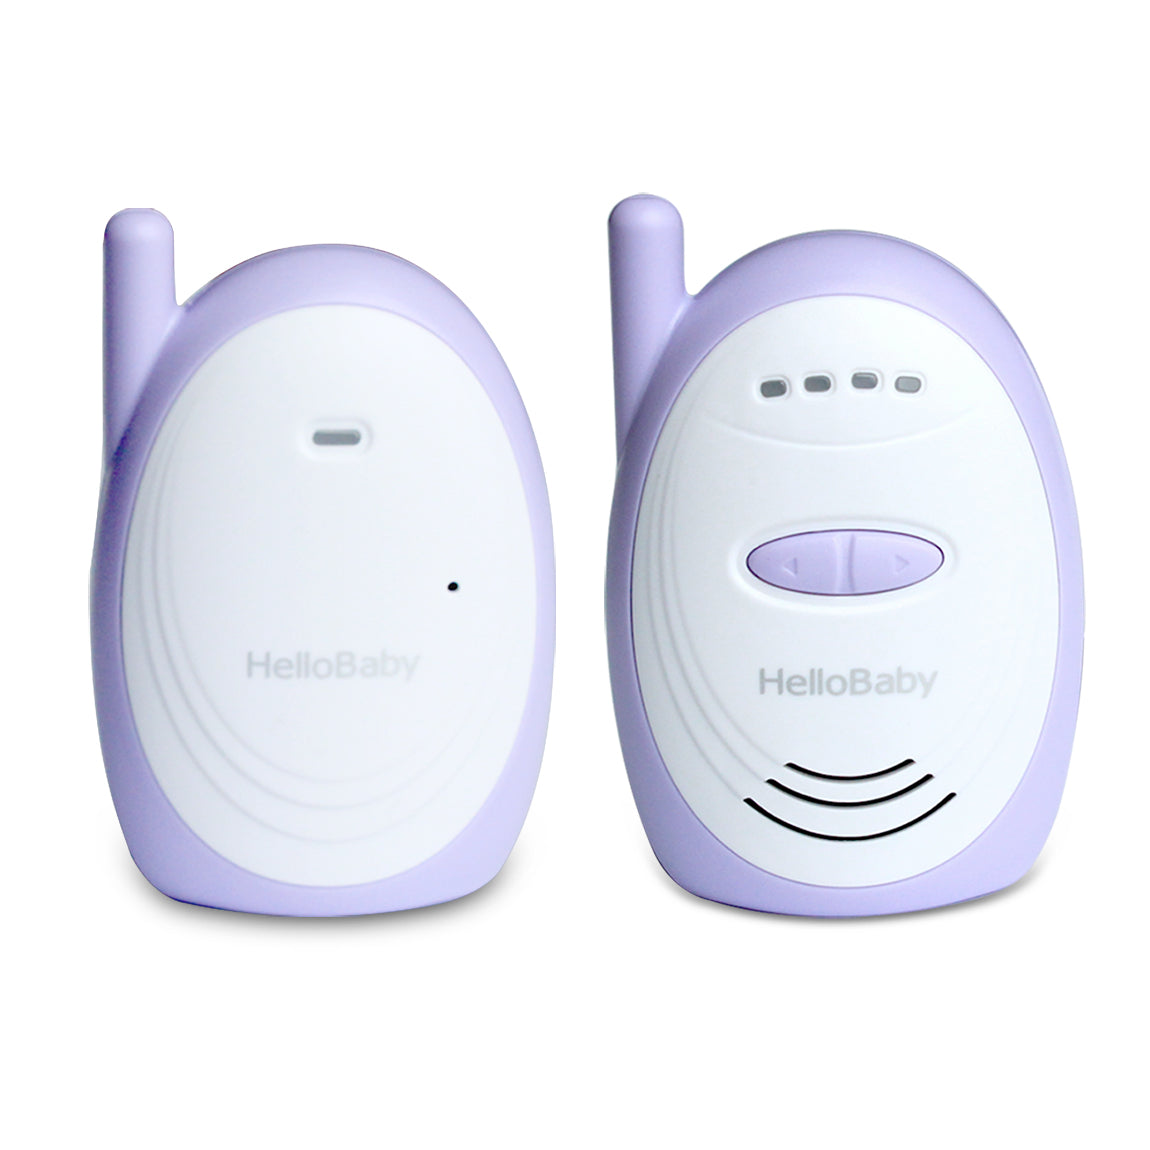 HelloBaby HB168 Audio Baby Monitor with up to 1,000 ft of Range, Sound  Indicator, Digitized Transmission, One Way Audio